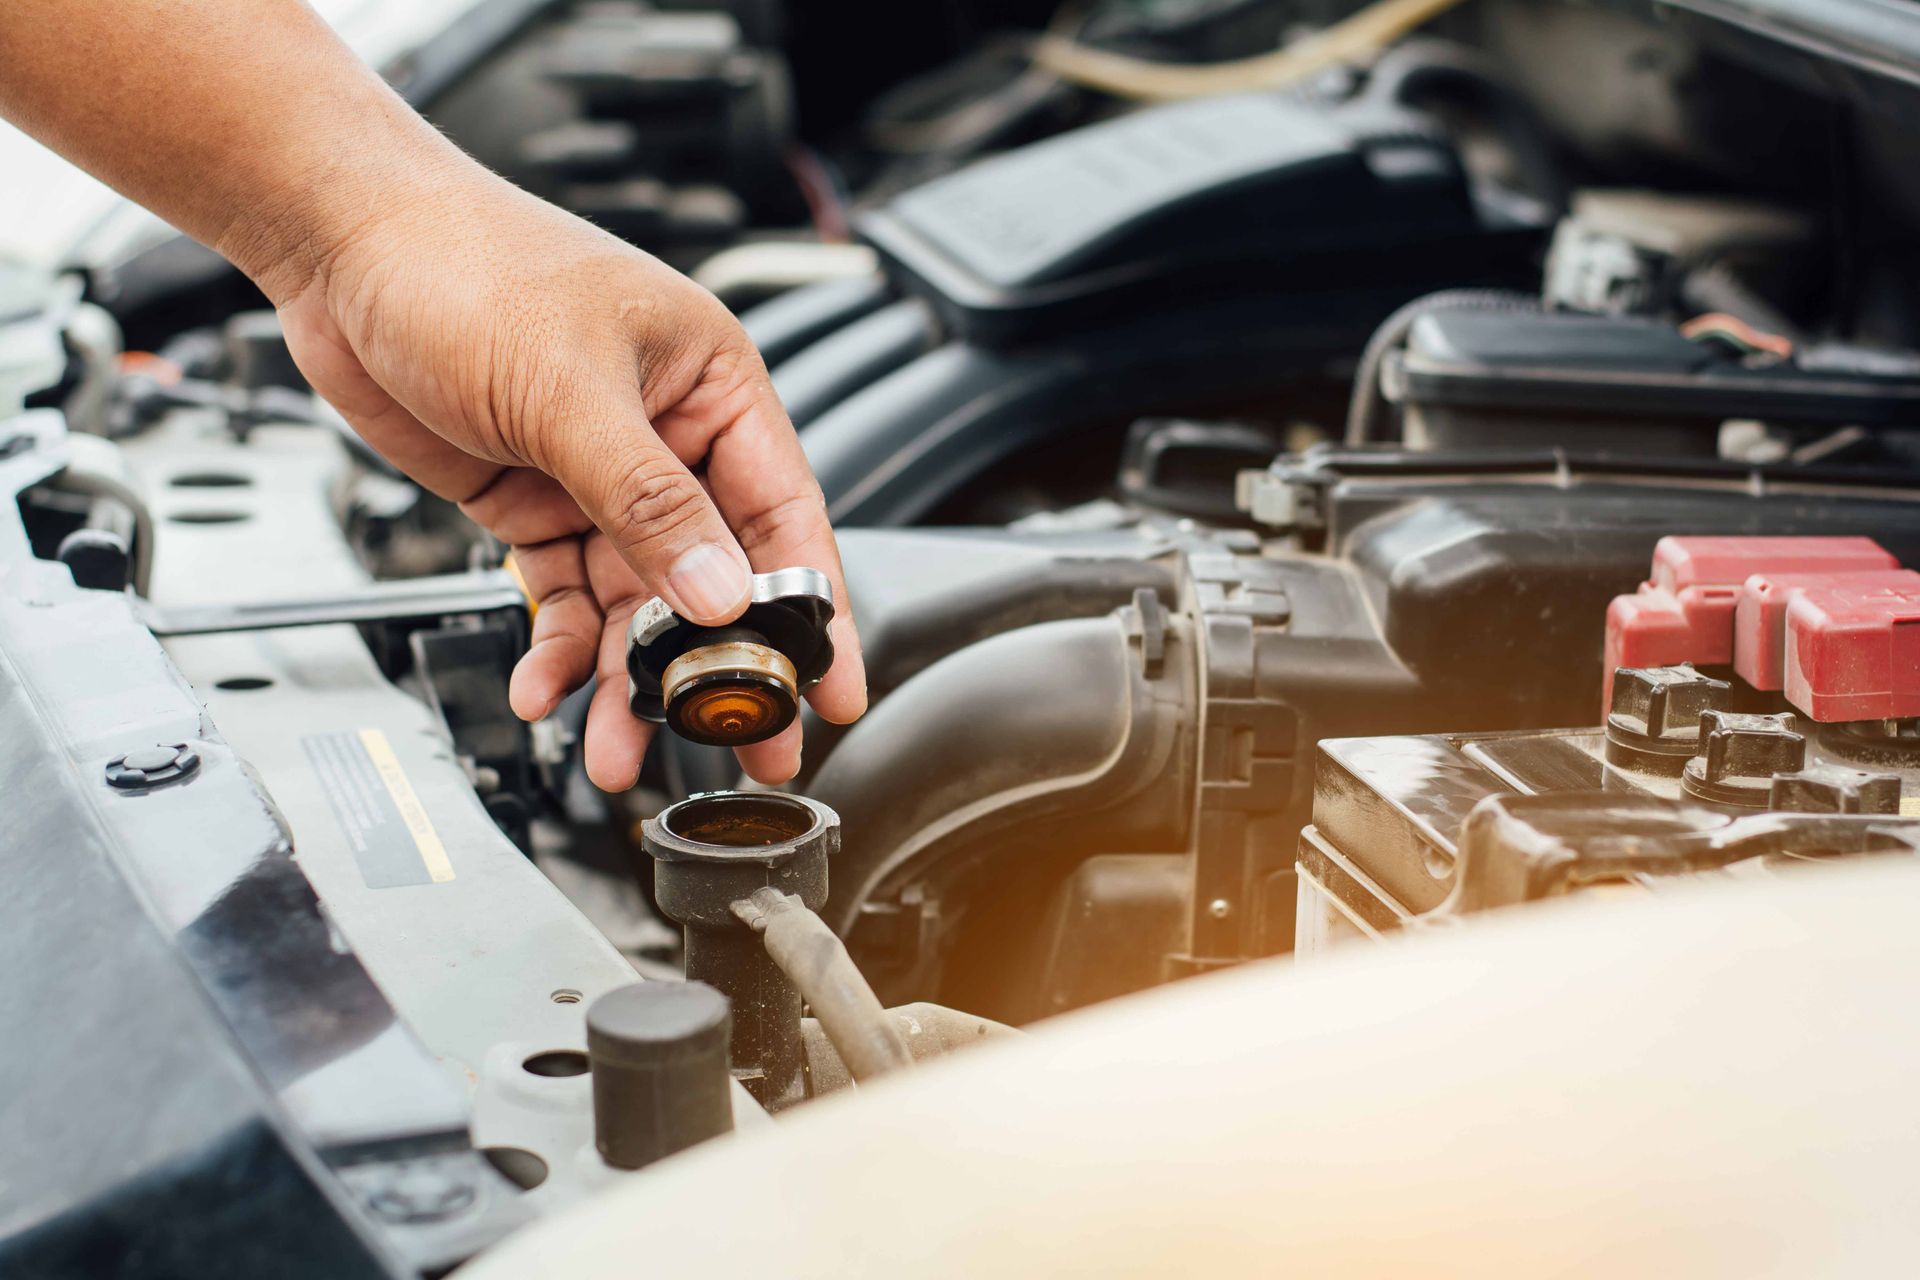 a person is holding a radiator cap over a car radiator